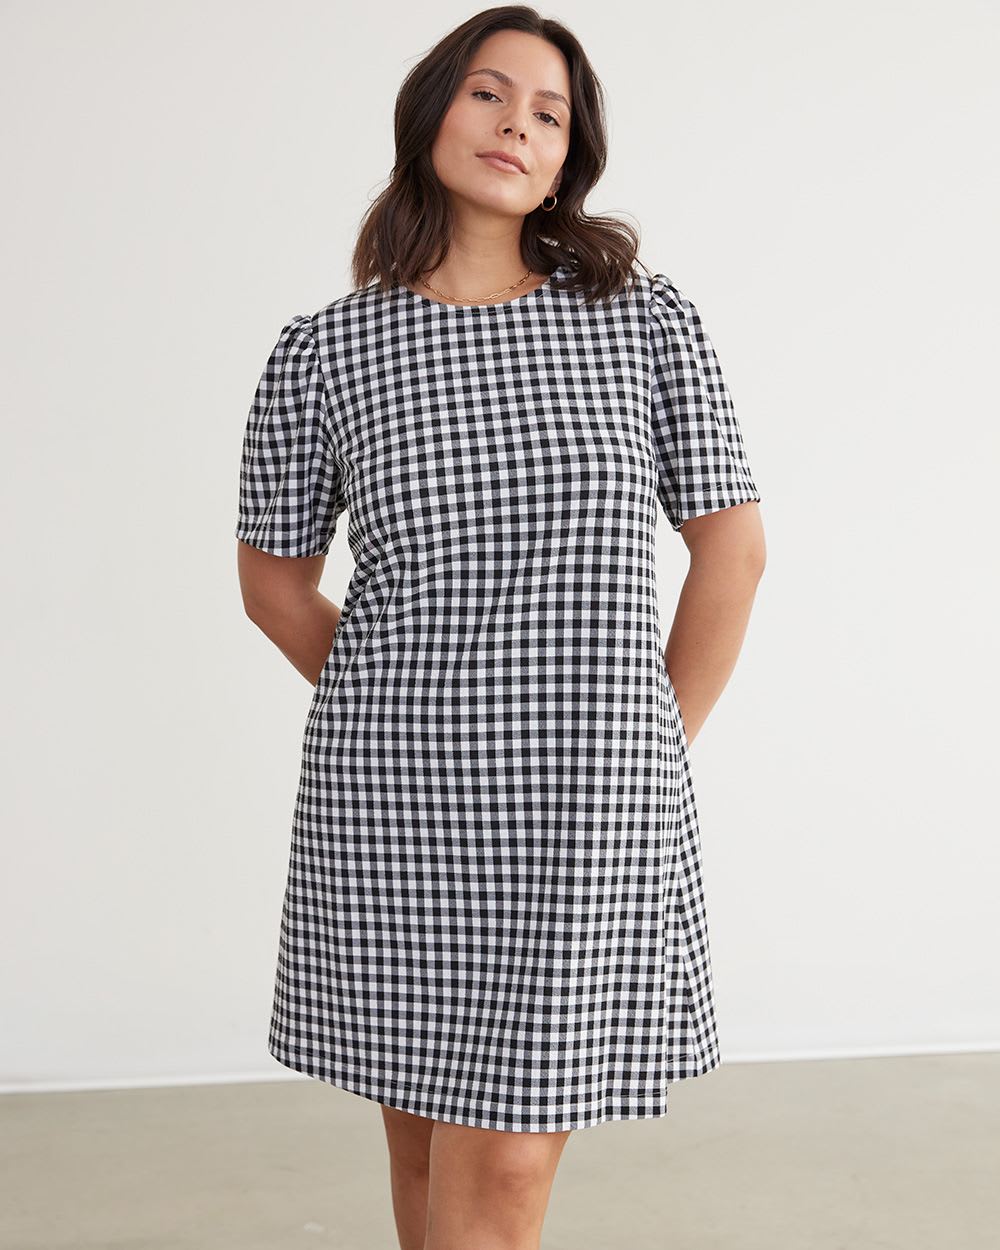 Short-Puffy-Sleeve Dress with Bow at Neckline